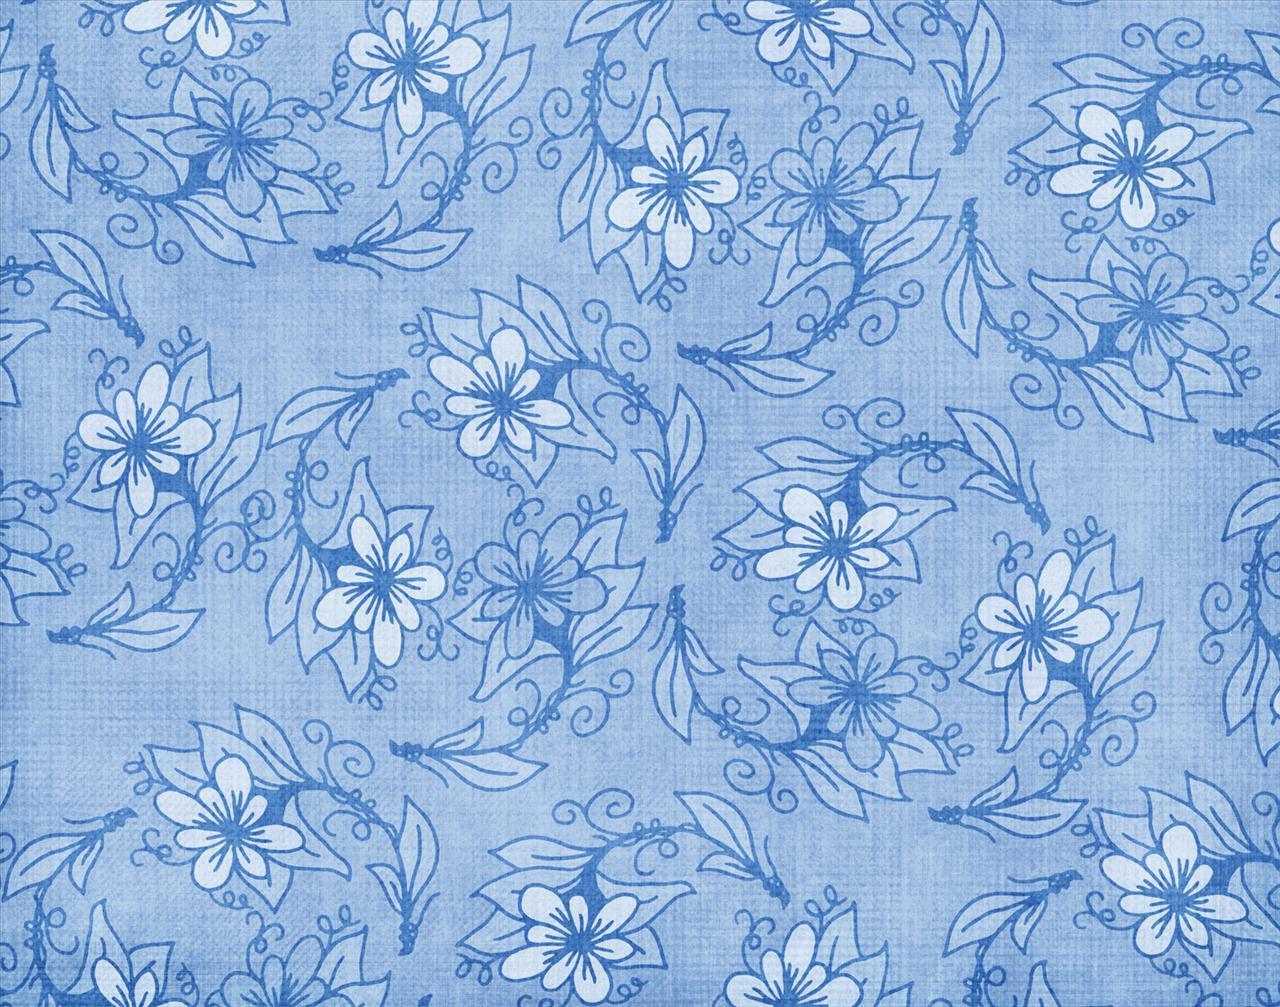 Floral Blues Free PPT Background for your PowerPoint